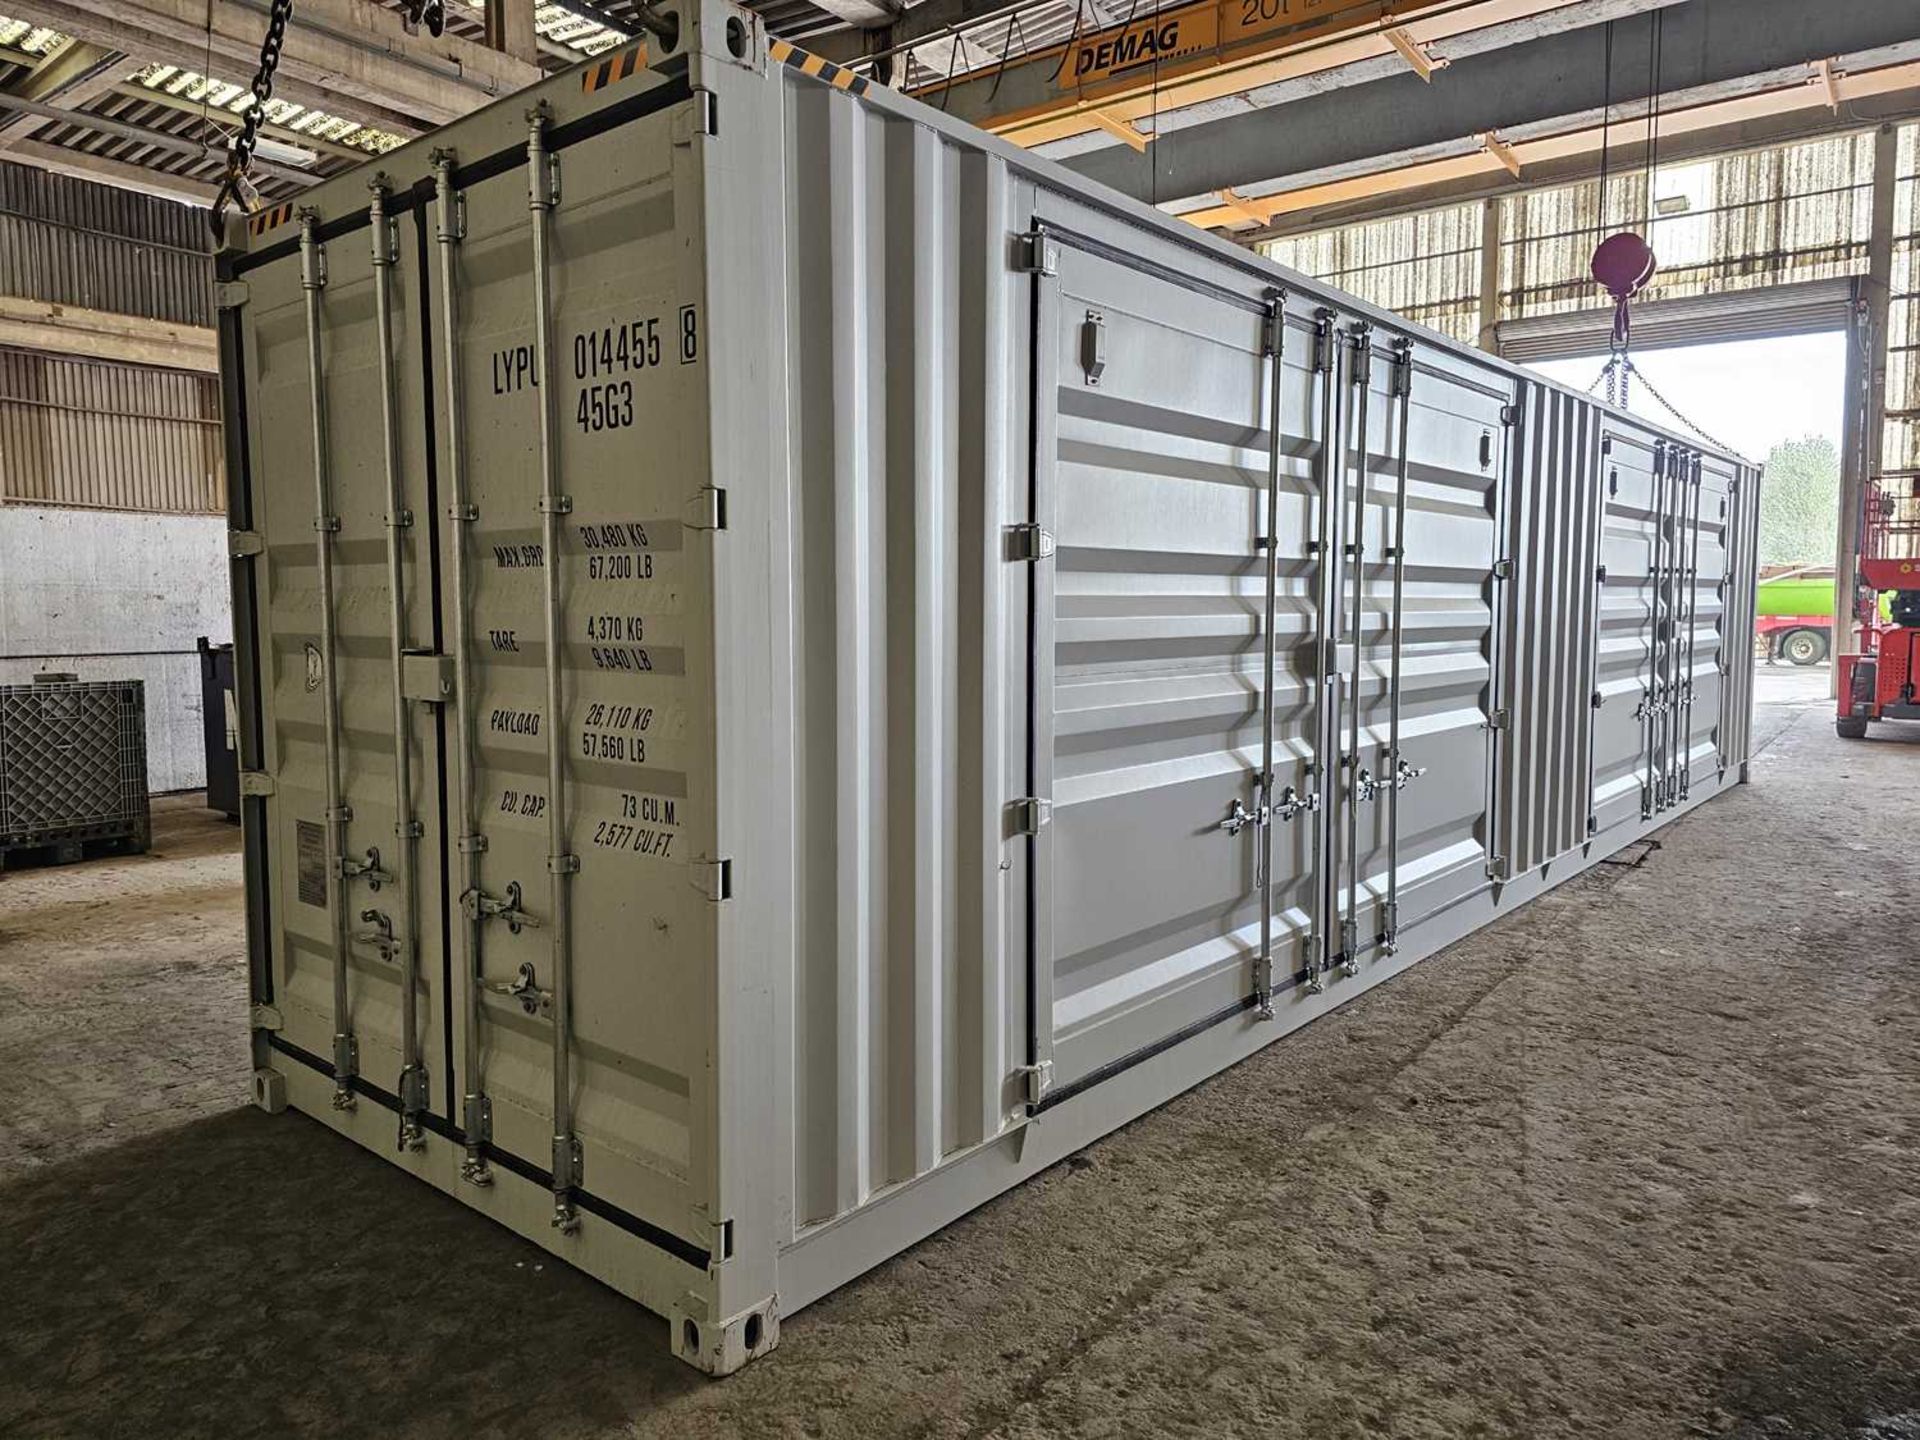 Unused 40' High Cube Container, 2 Side Doors